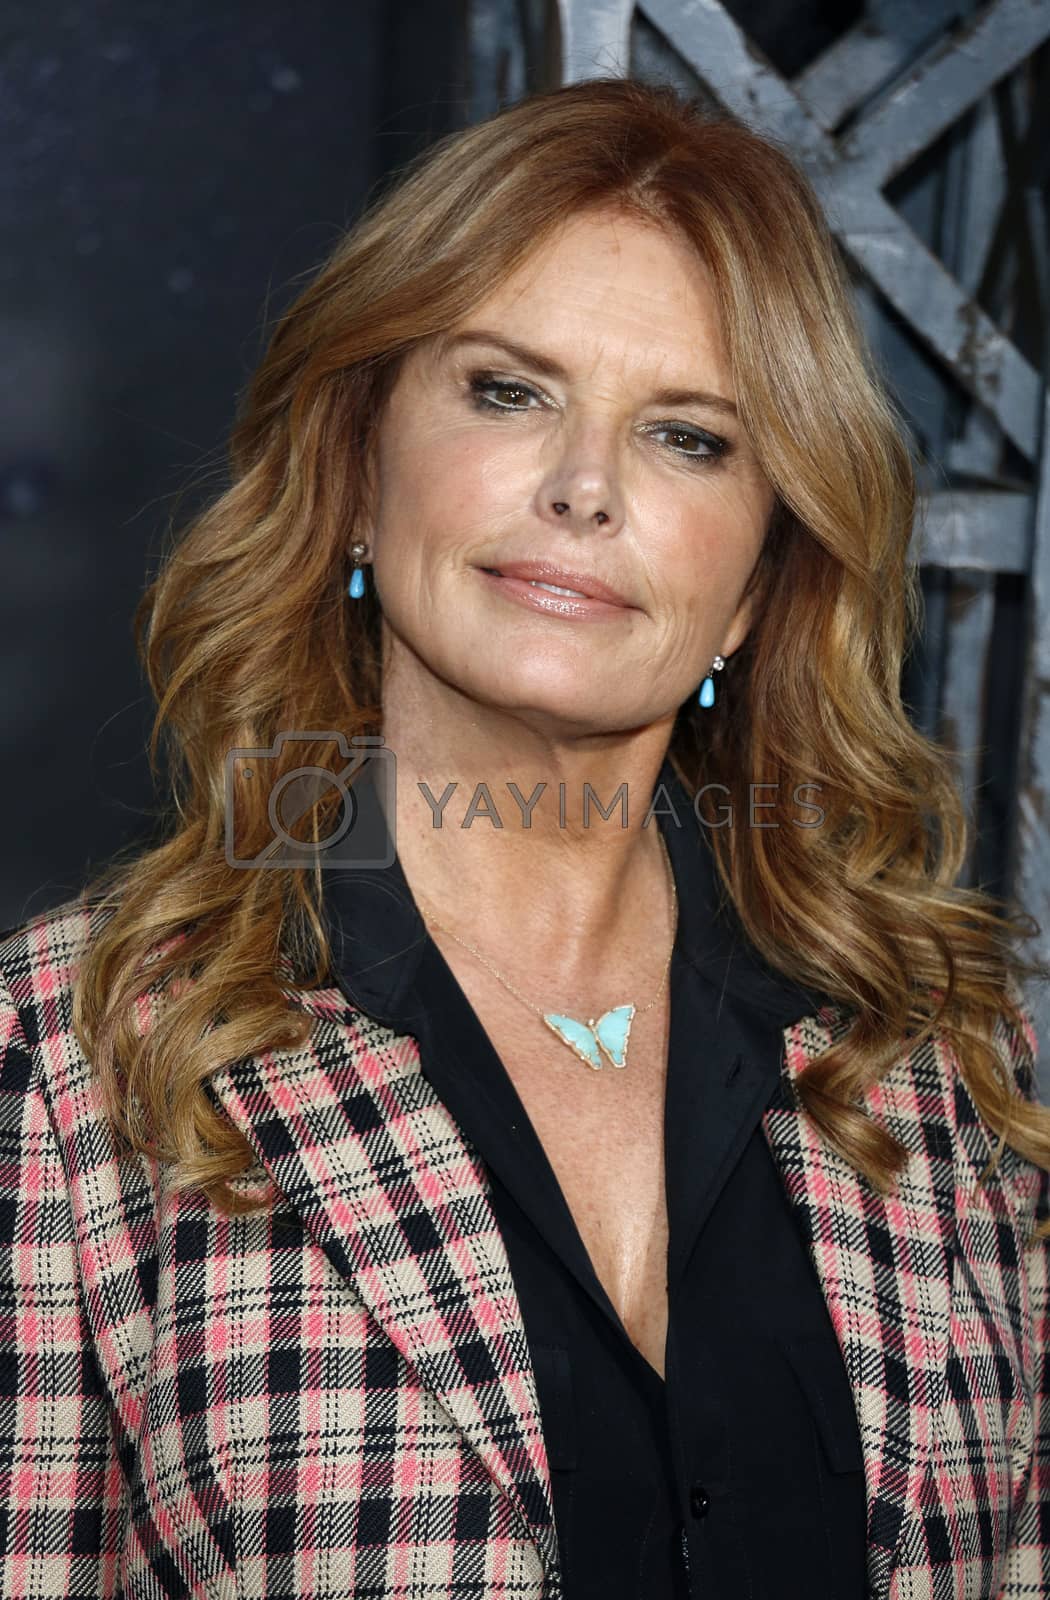 Royalty free image of Roma Downey by Lumeimages